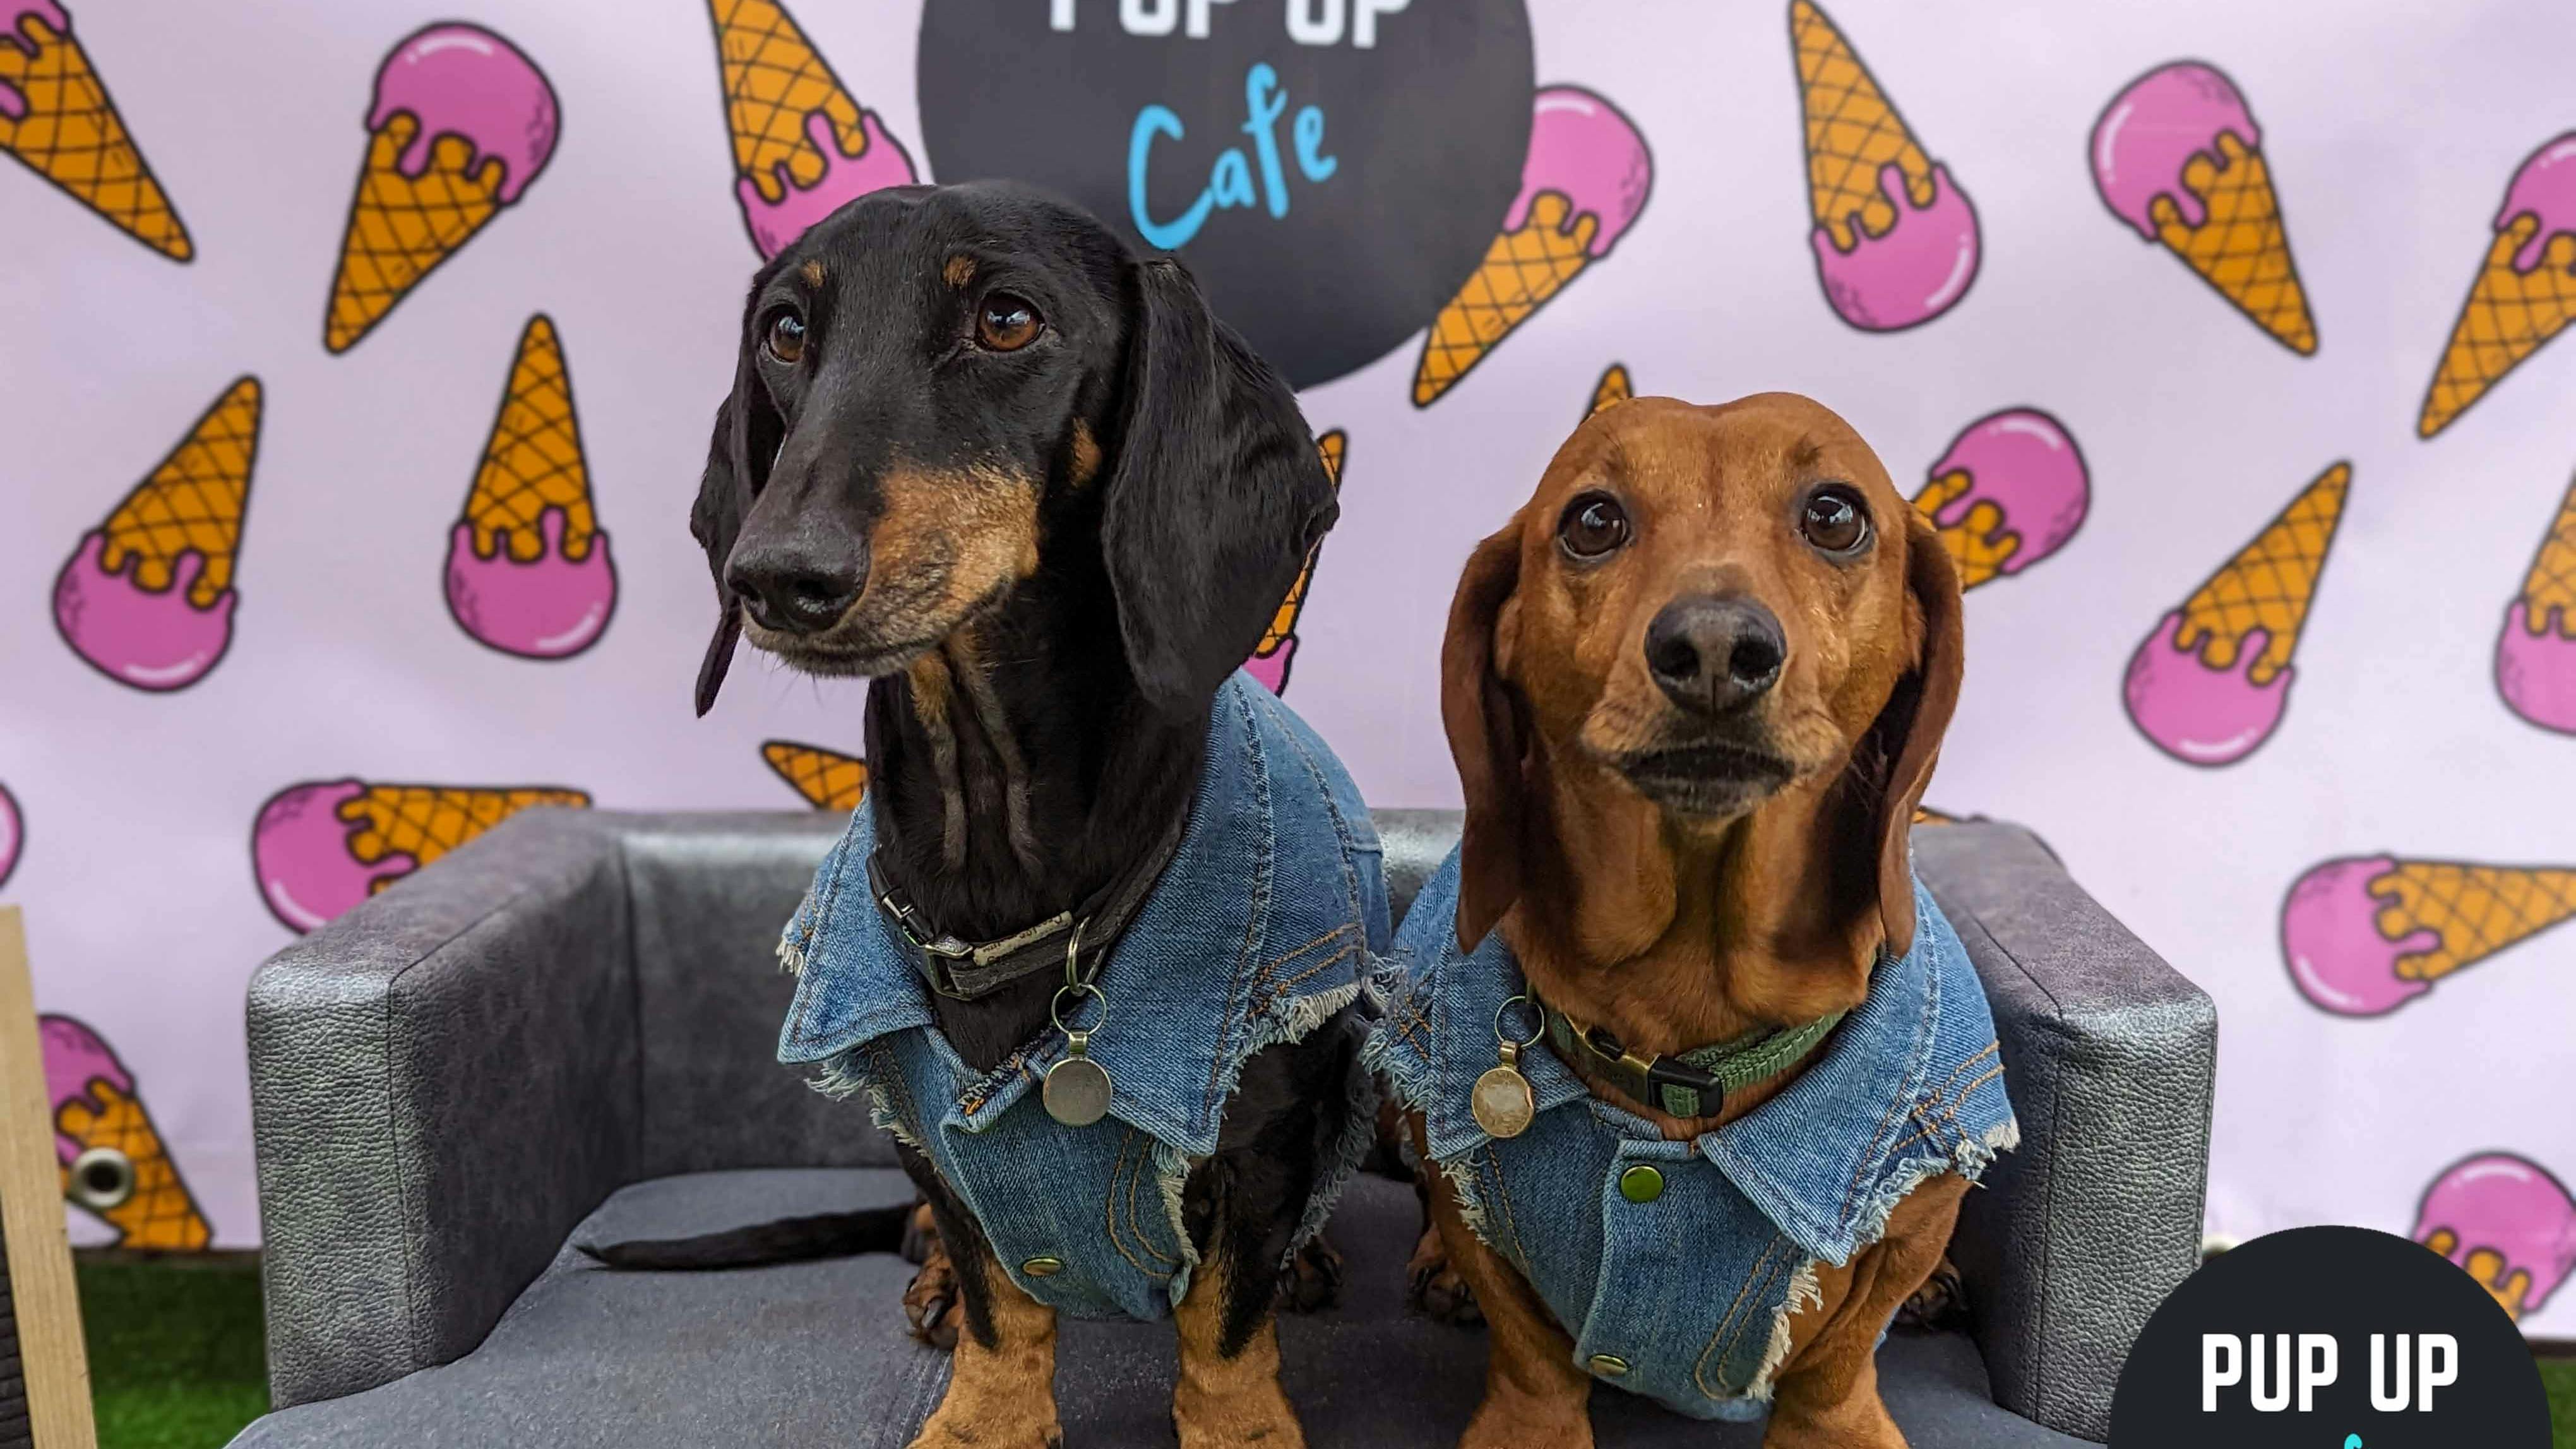 All dachshund owners in Milton Keynes invited to special event